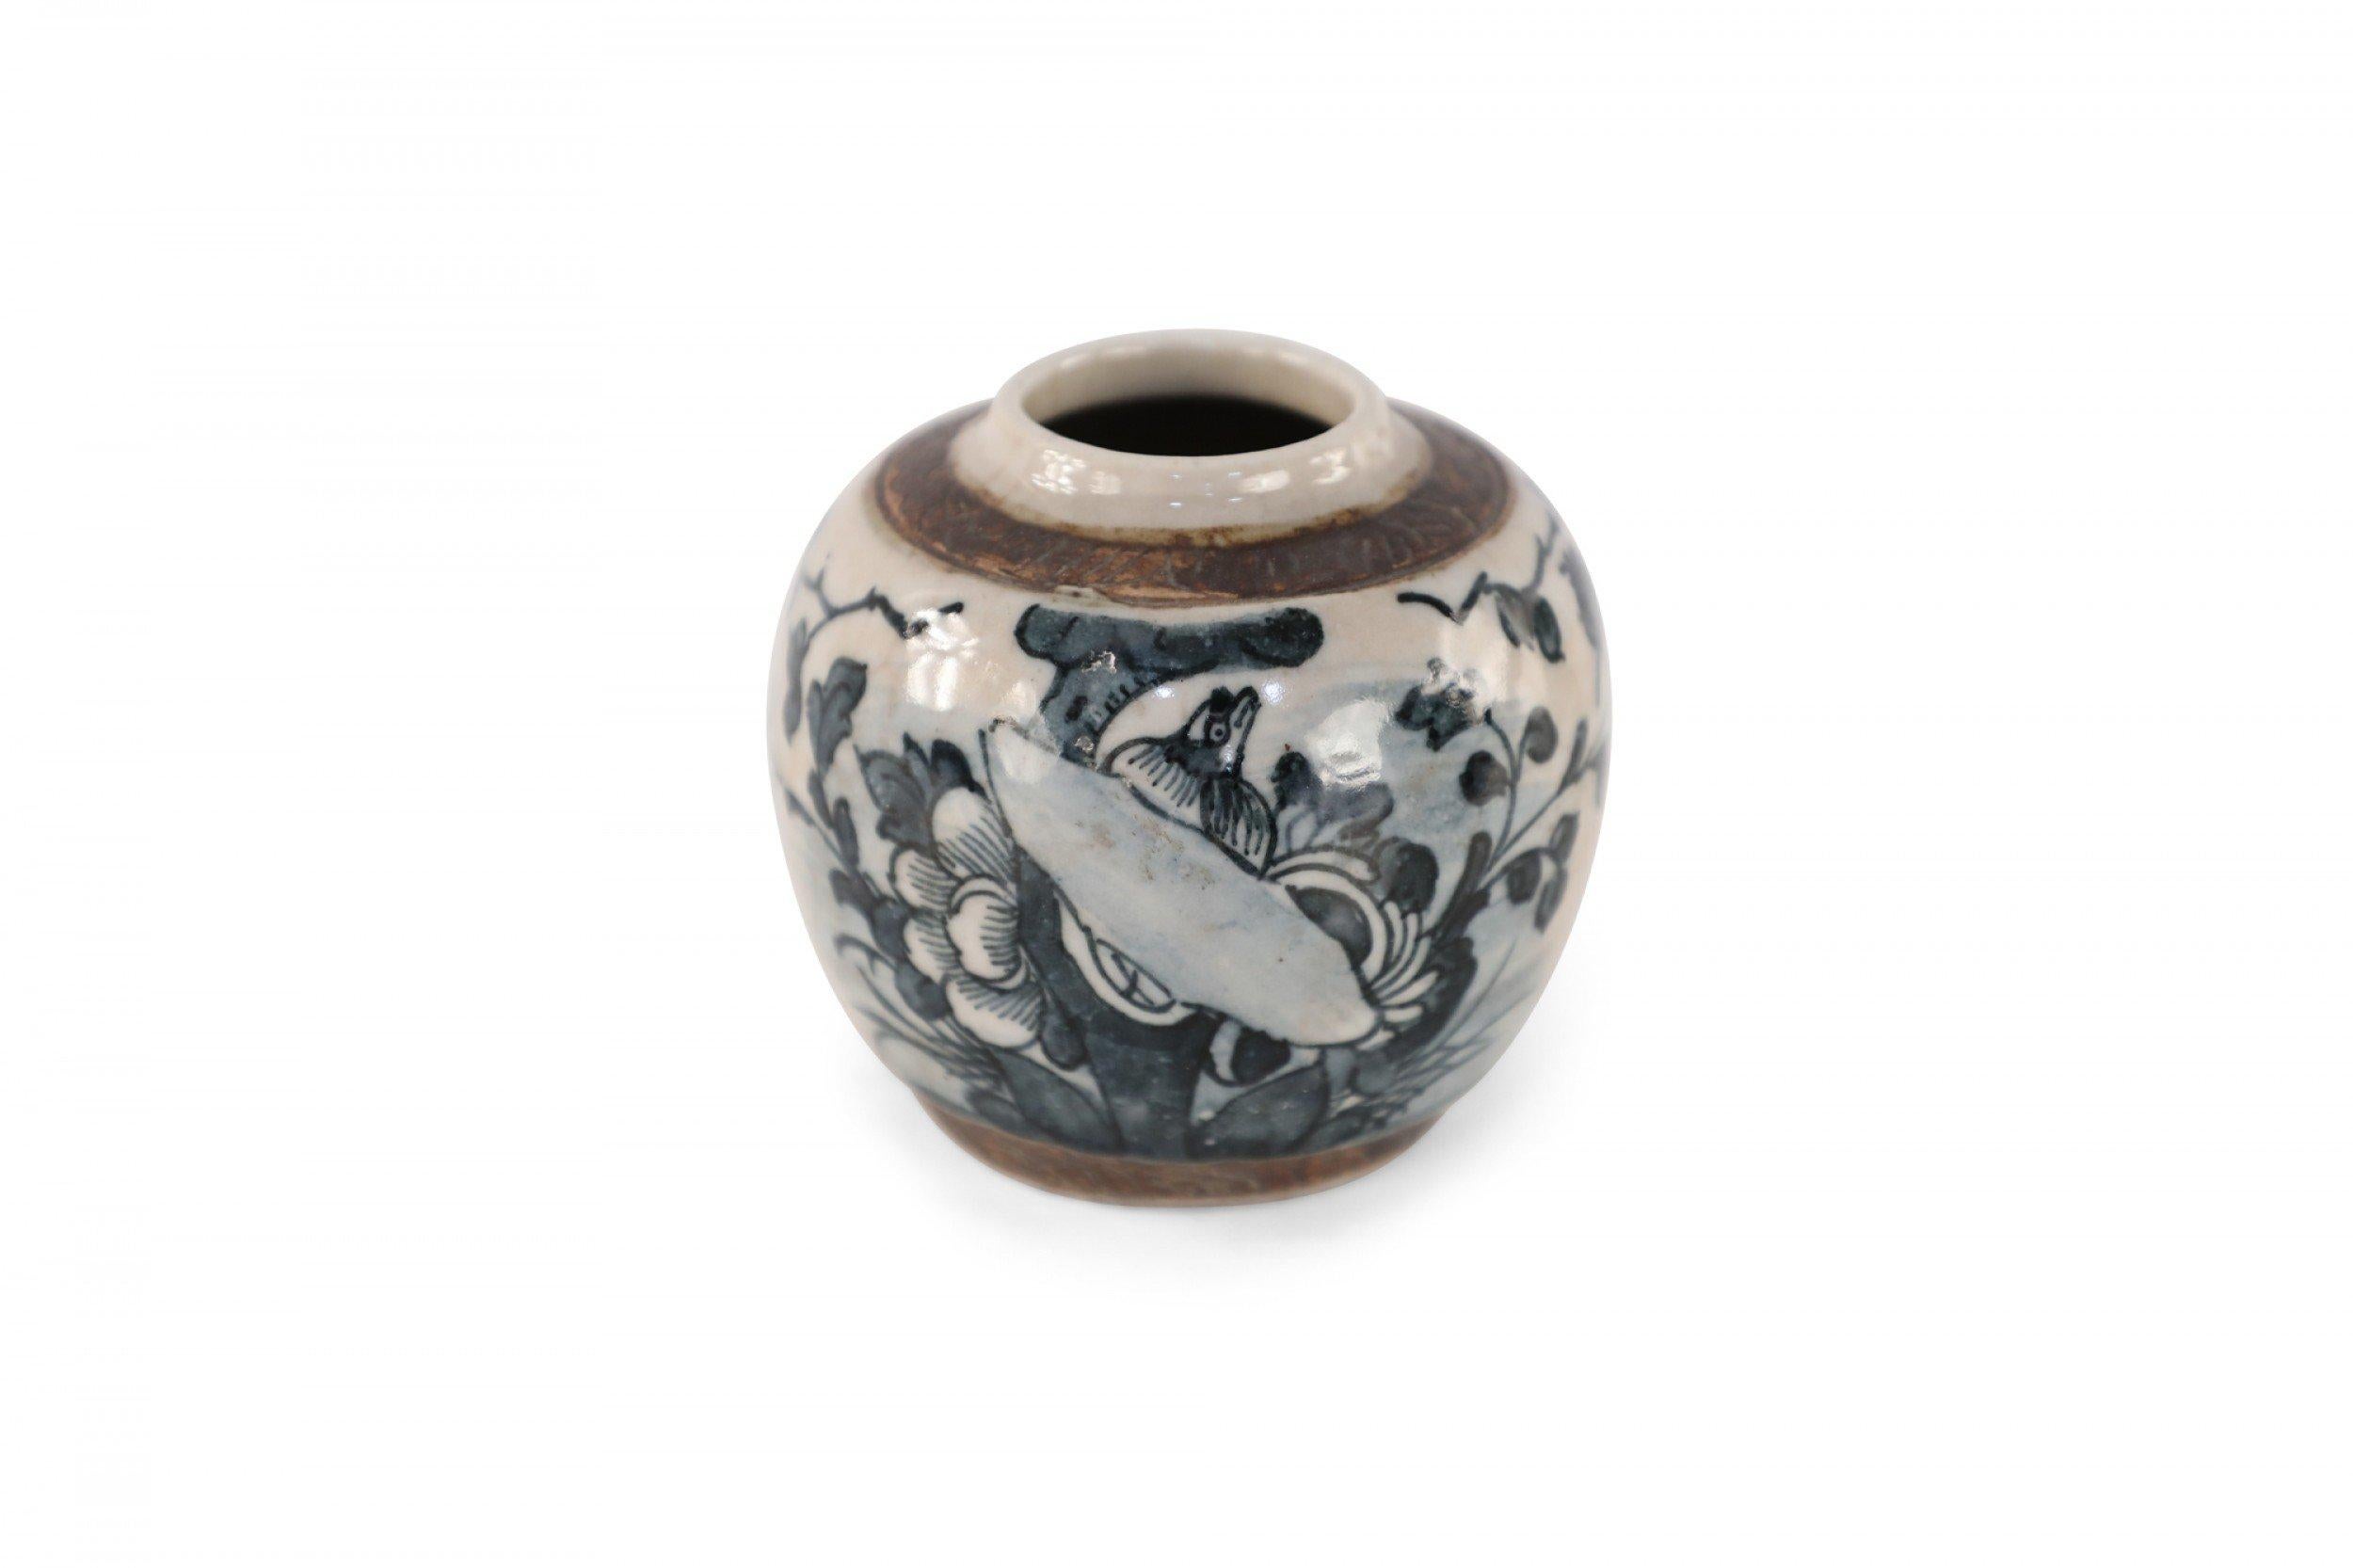 Antique Chinese (early 20th century) small, beige porcelain jar with a slight lip and charcoal-colored florals.
       